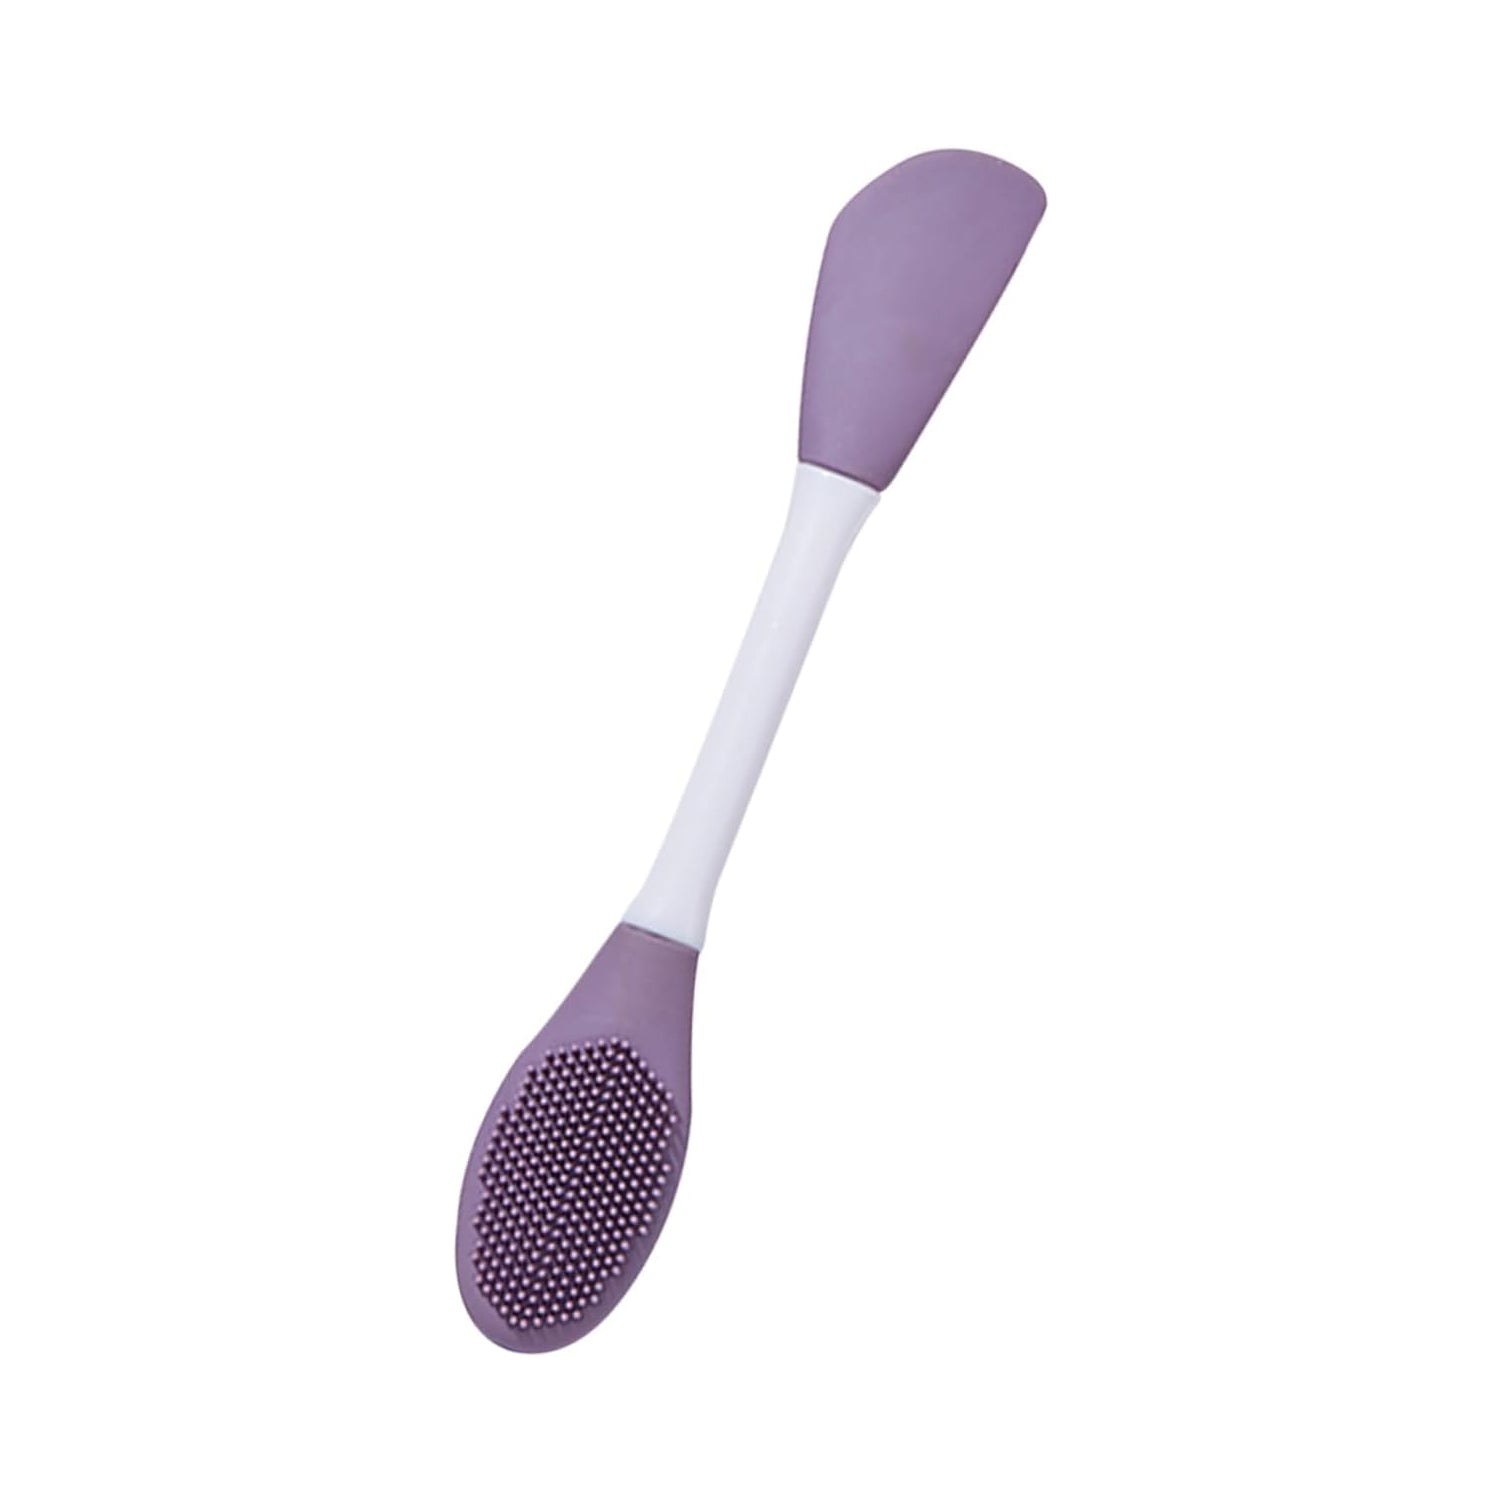 12532 Double-headed Silicone Mask Brush Face Cleansing and Applying Mud Mask Beauty Salon Special Brush Smear Tool Facial Scrub Silicone Wash Scrubber Face Tools (1 Pc)